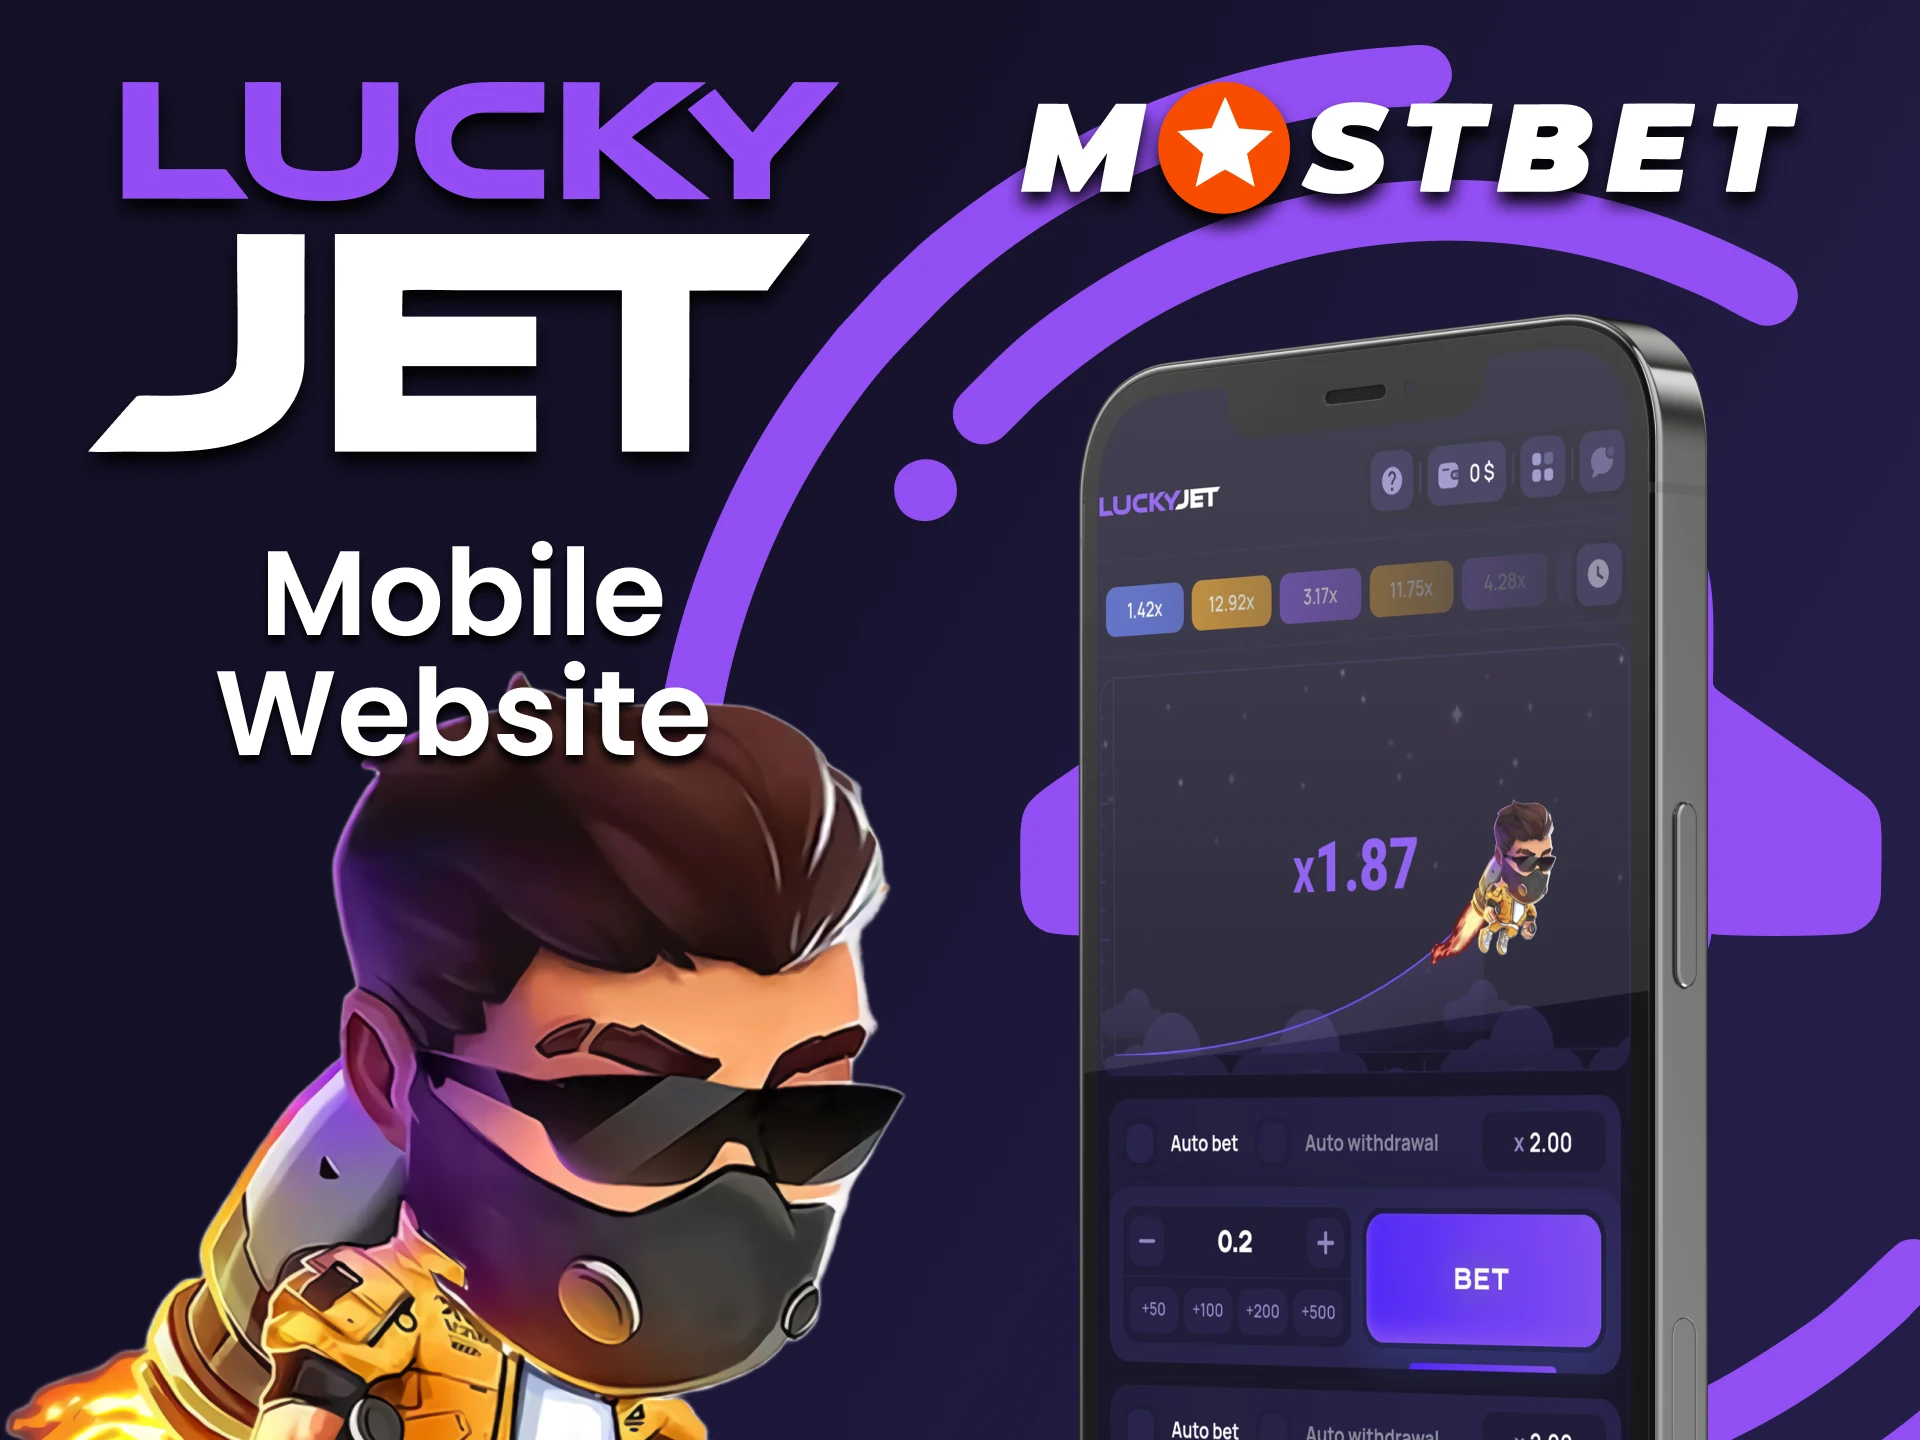 Use your phone to play Lucky Jet on Mostbet.